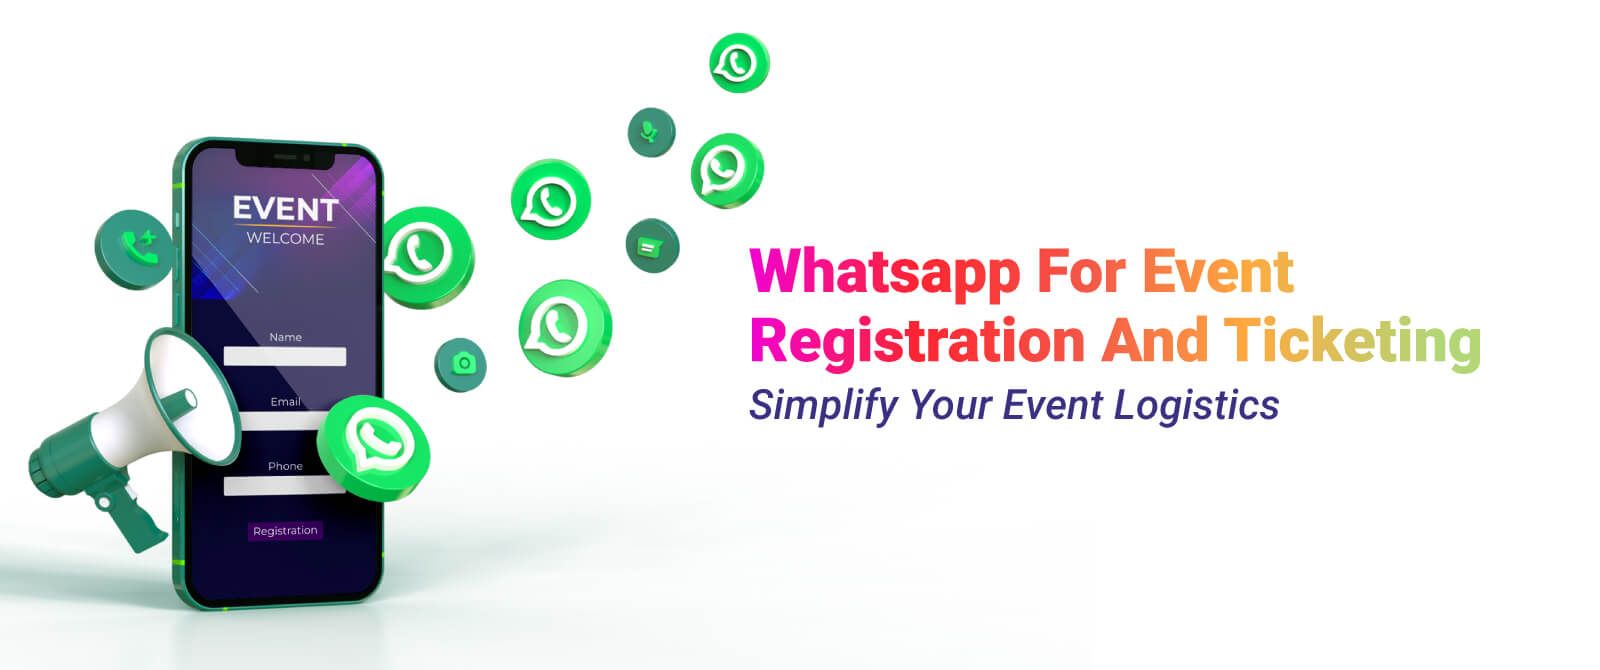 Whatsapp For Event Registration And Ticketing: Simplify Your Event Logistics